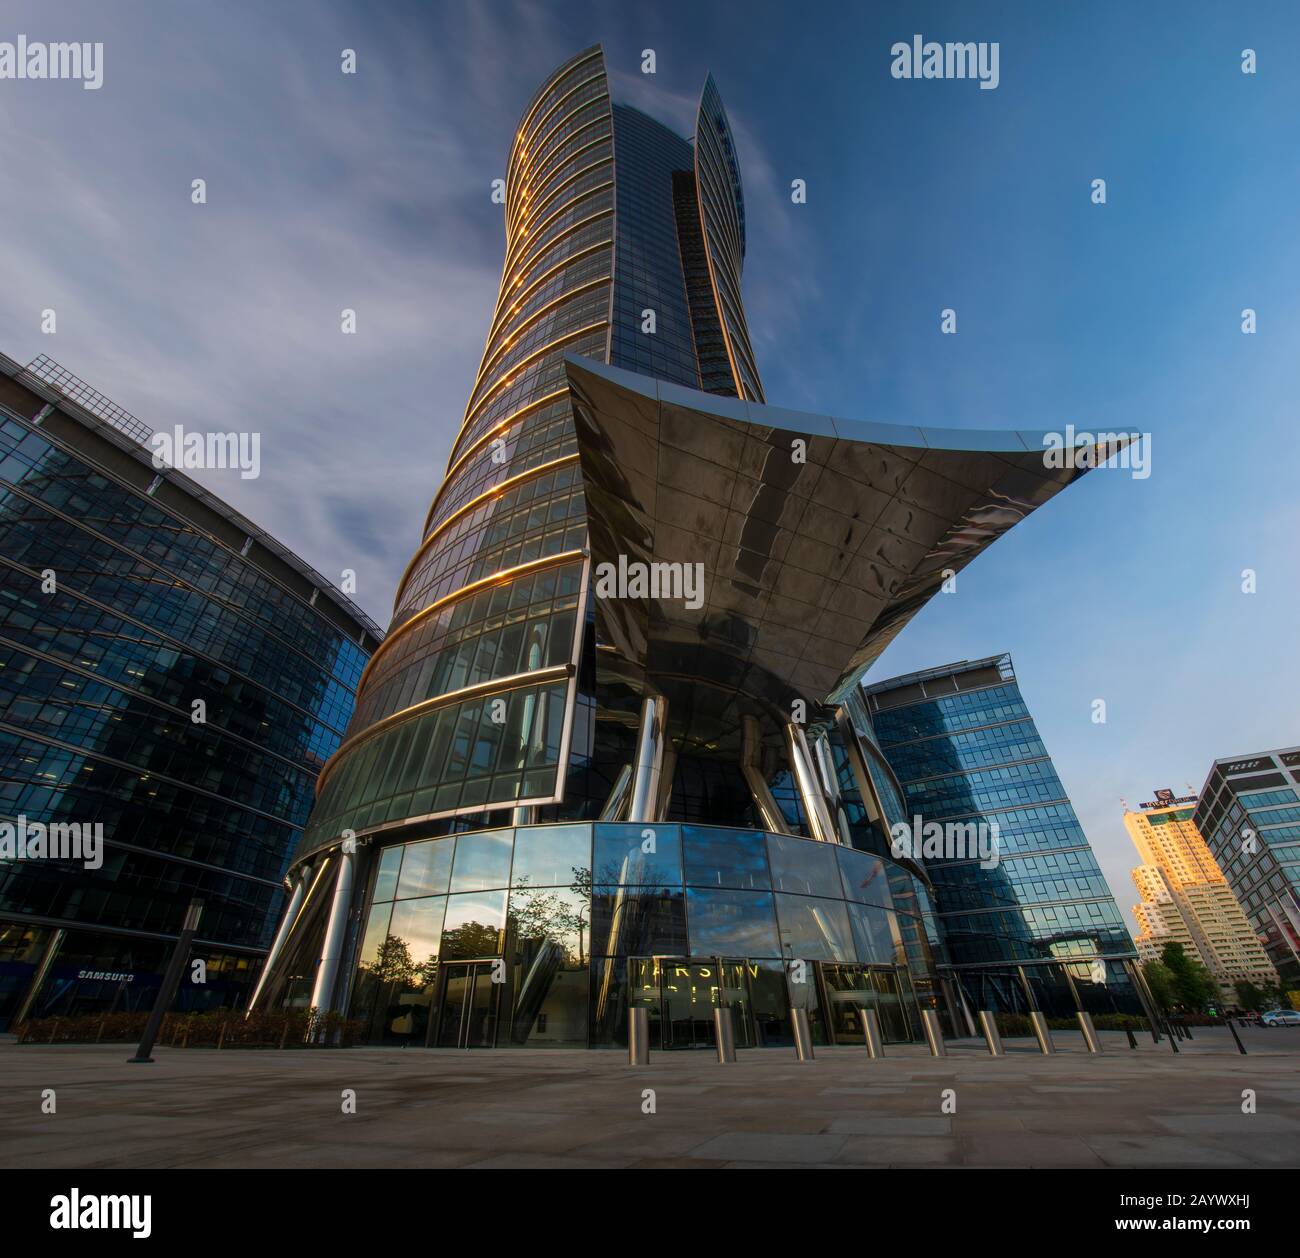 Warsaw Spire office complex at night Stock Photo